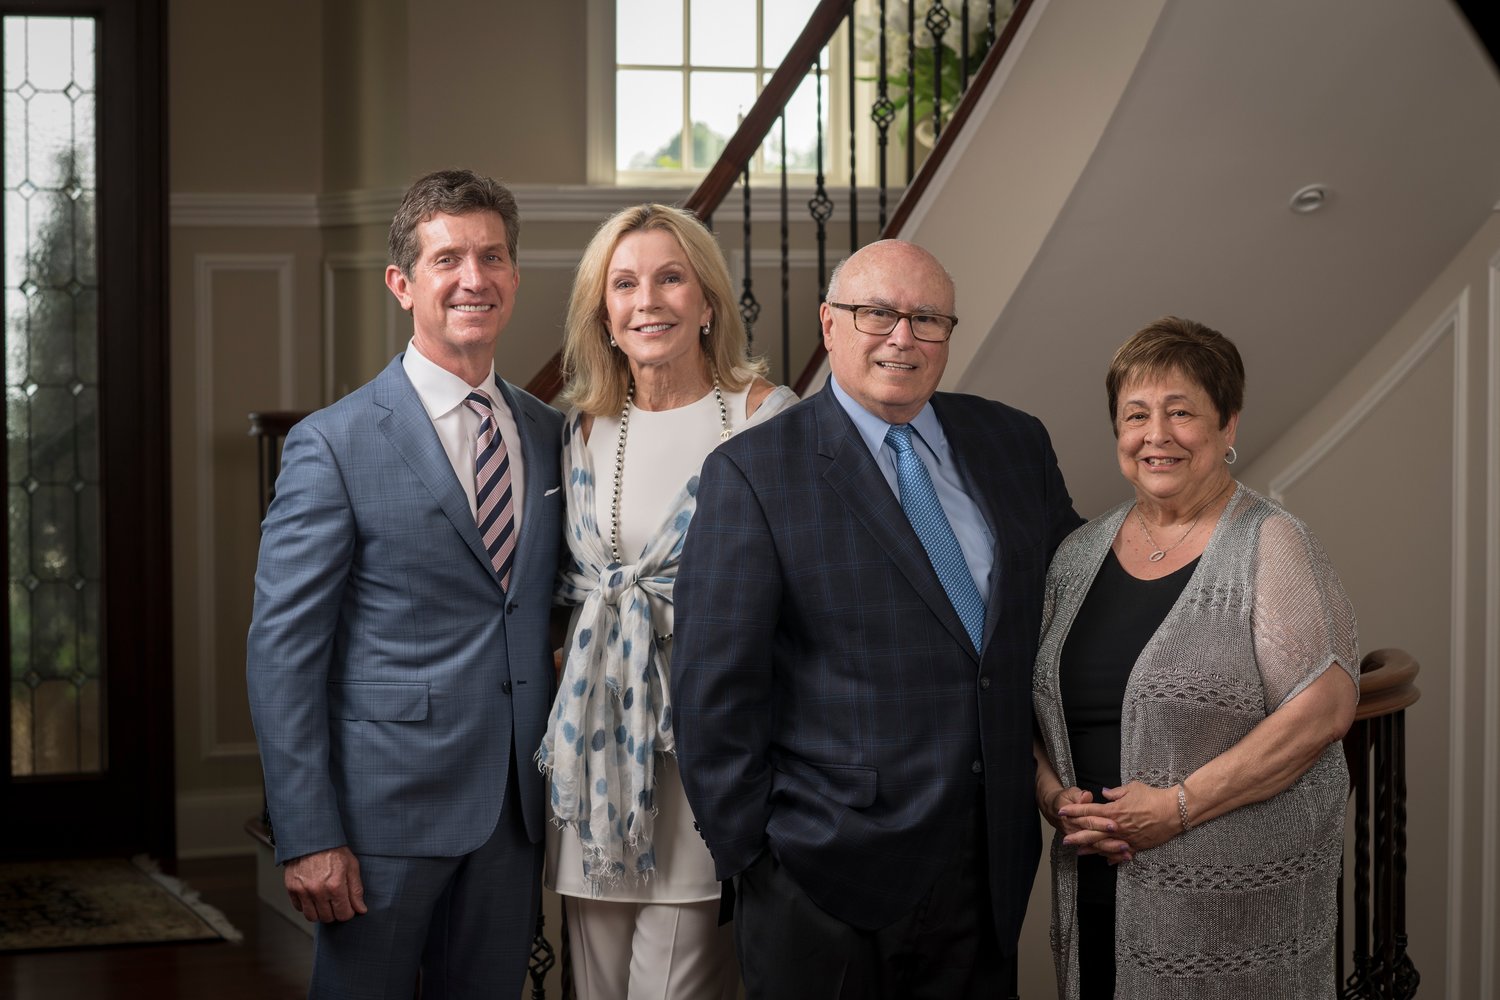 From left are One Vision Honorary Campaign Chairs Alex and Pat Gorsky and Campaign Chairs Richard and Angela Clark.